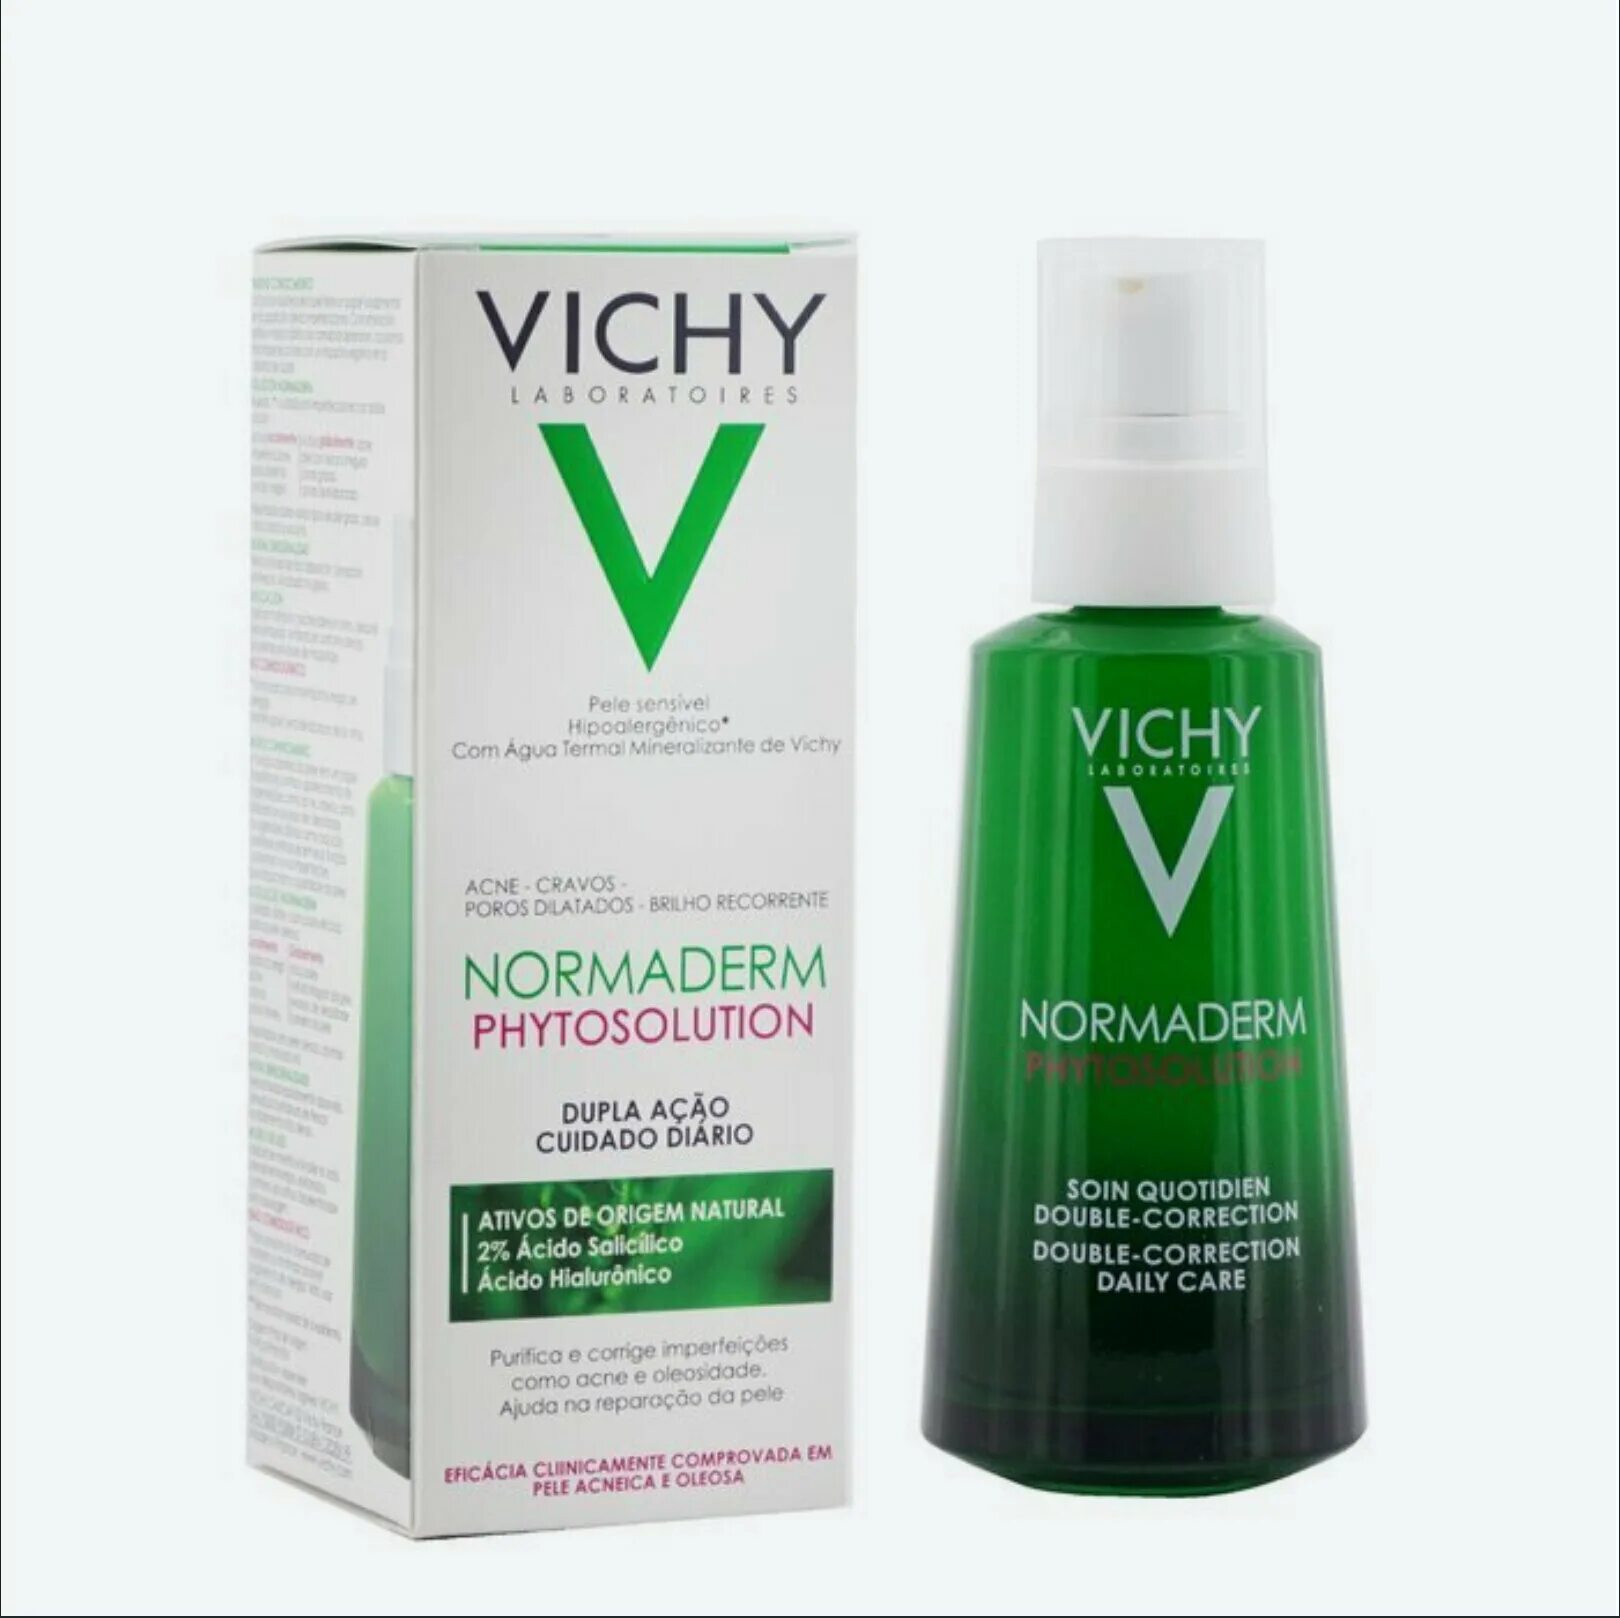 Vichy Normaderm phytosolution 50 мл. Normaderm Vichy 3 мл. Vichy Normaderm Double correction. Normaderm phytosolution Vichy Double correction.